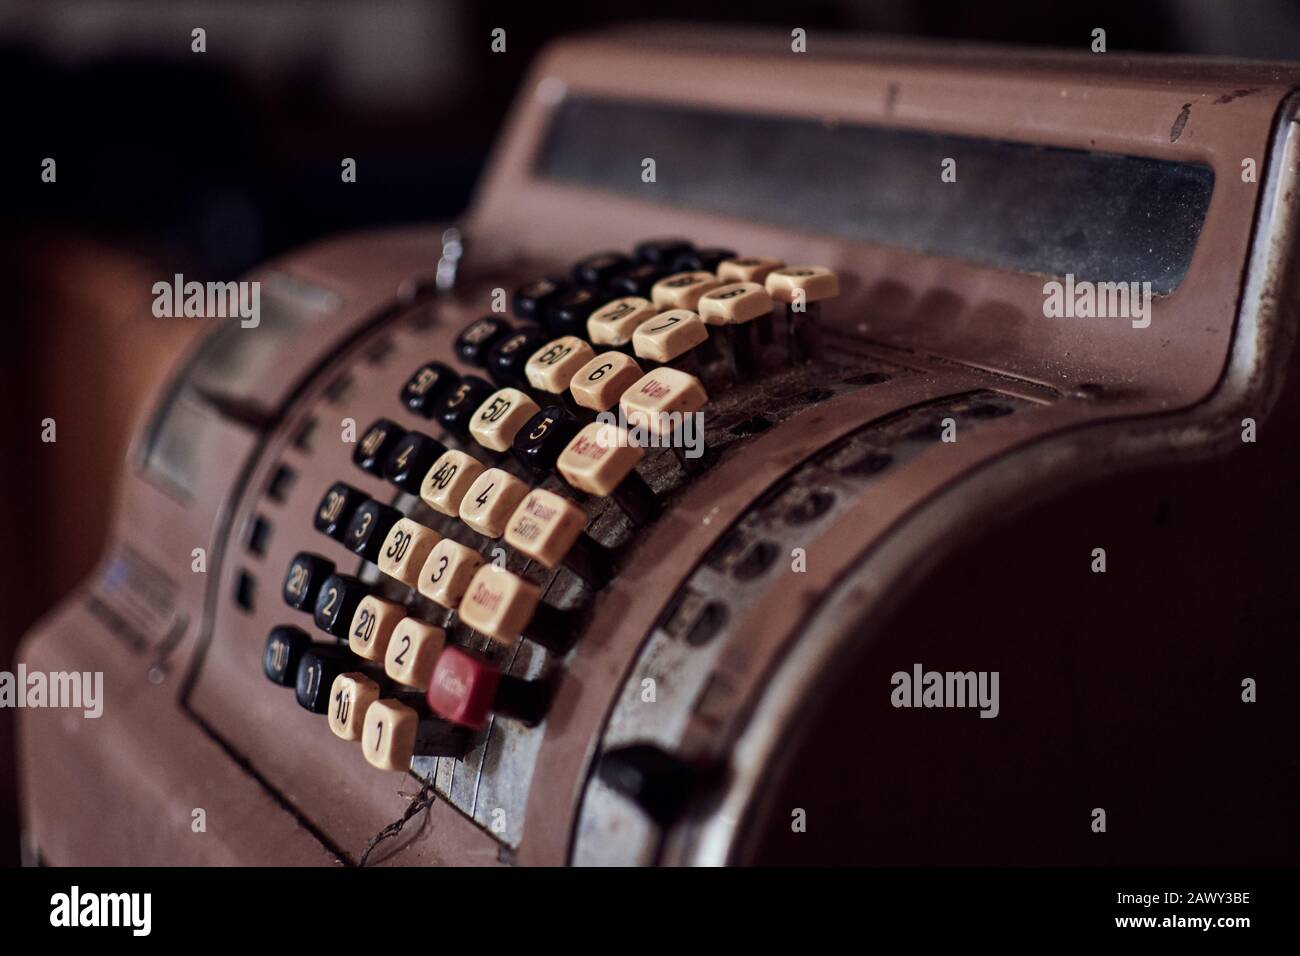 Vintage cash register. Close-up of a brown and ancient restaurant till with many yellowed buttons. Stock Photo